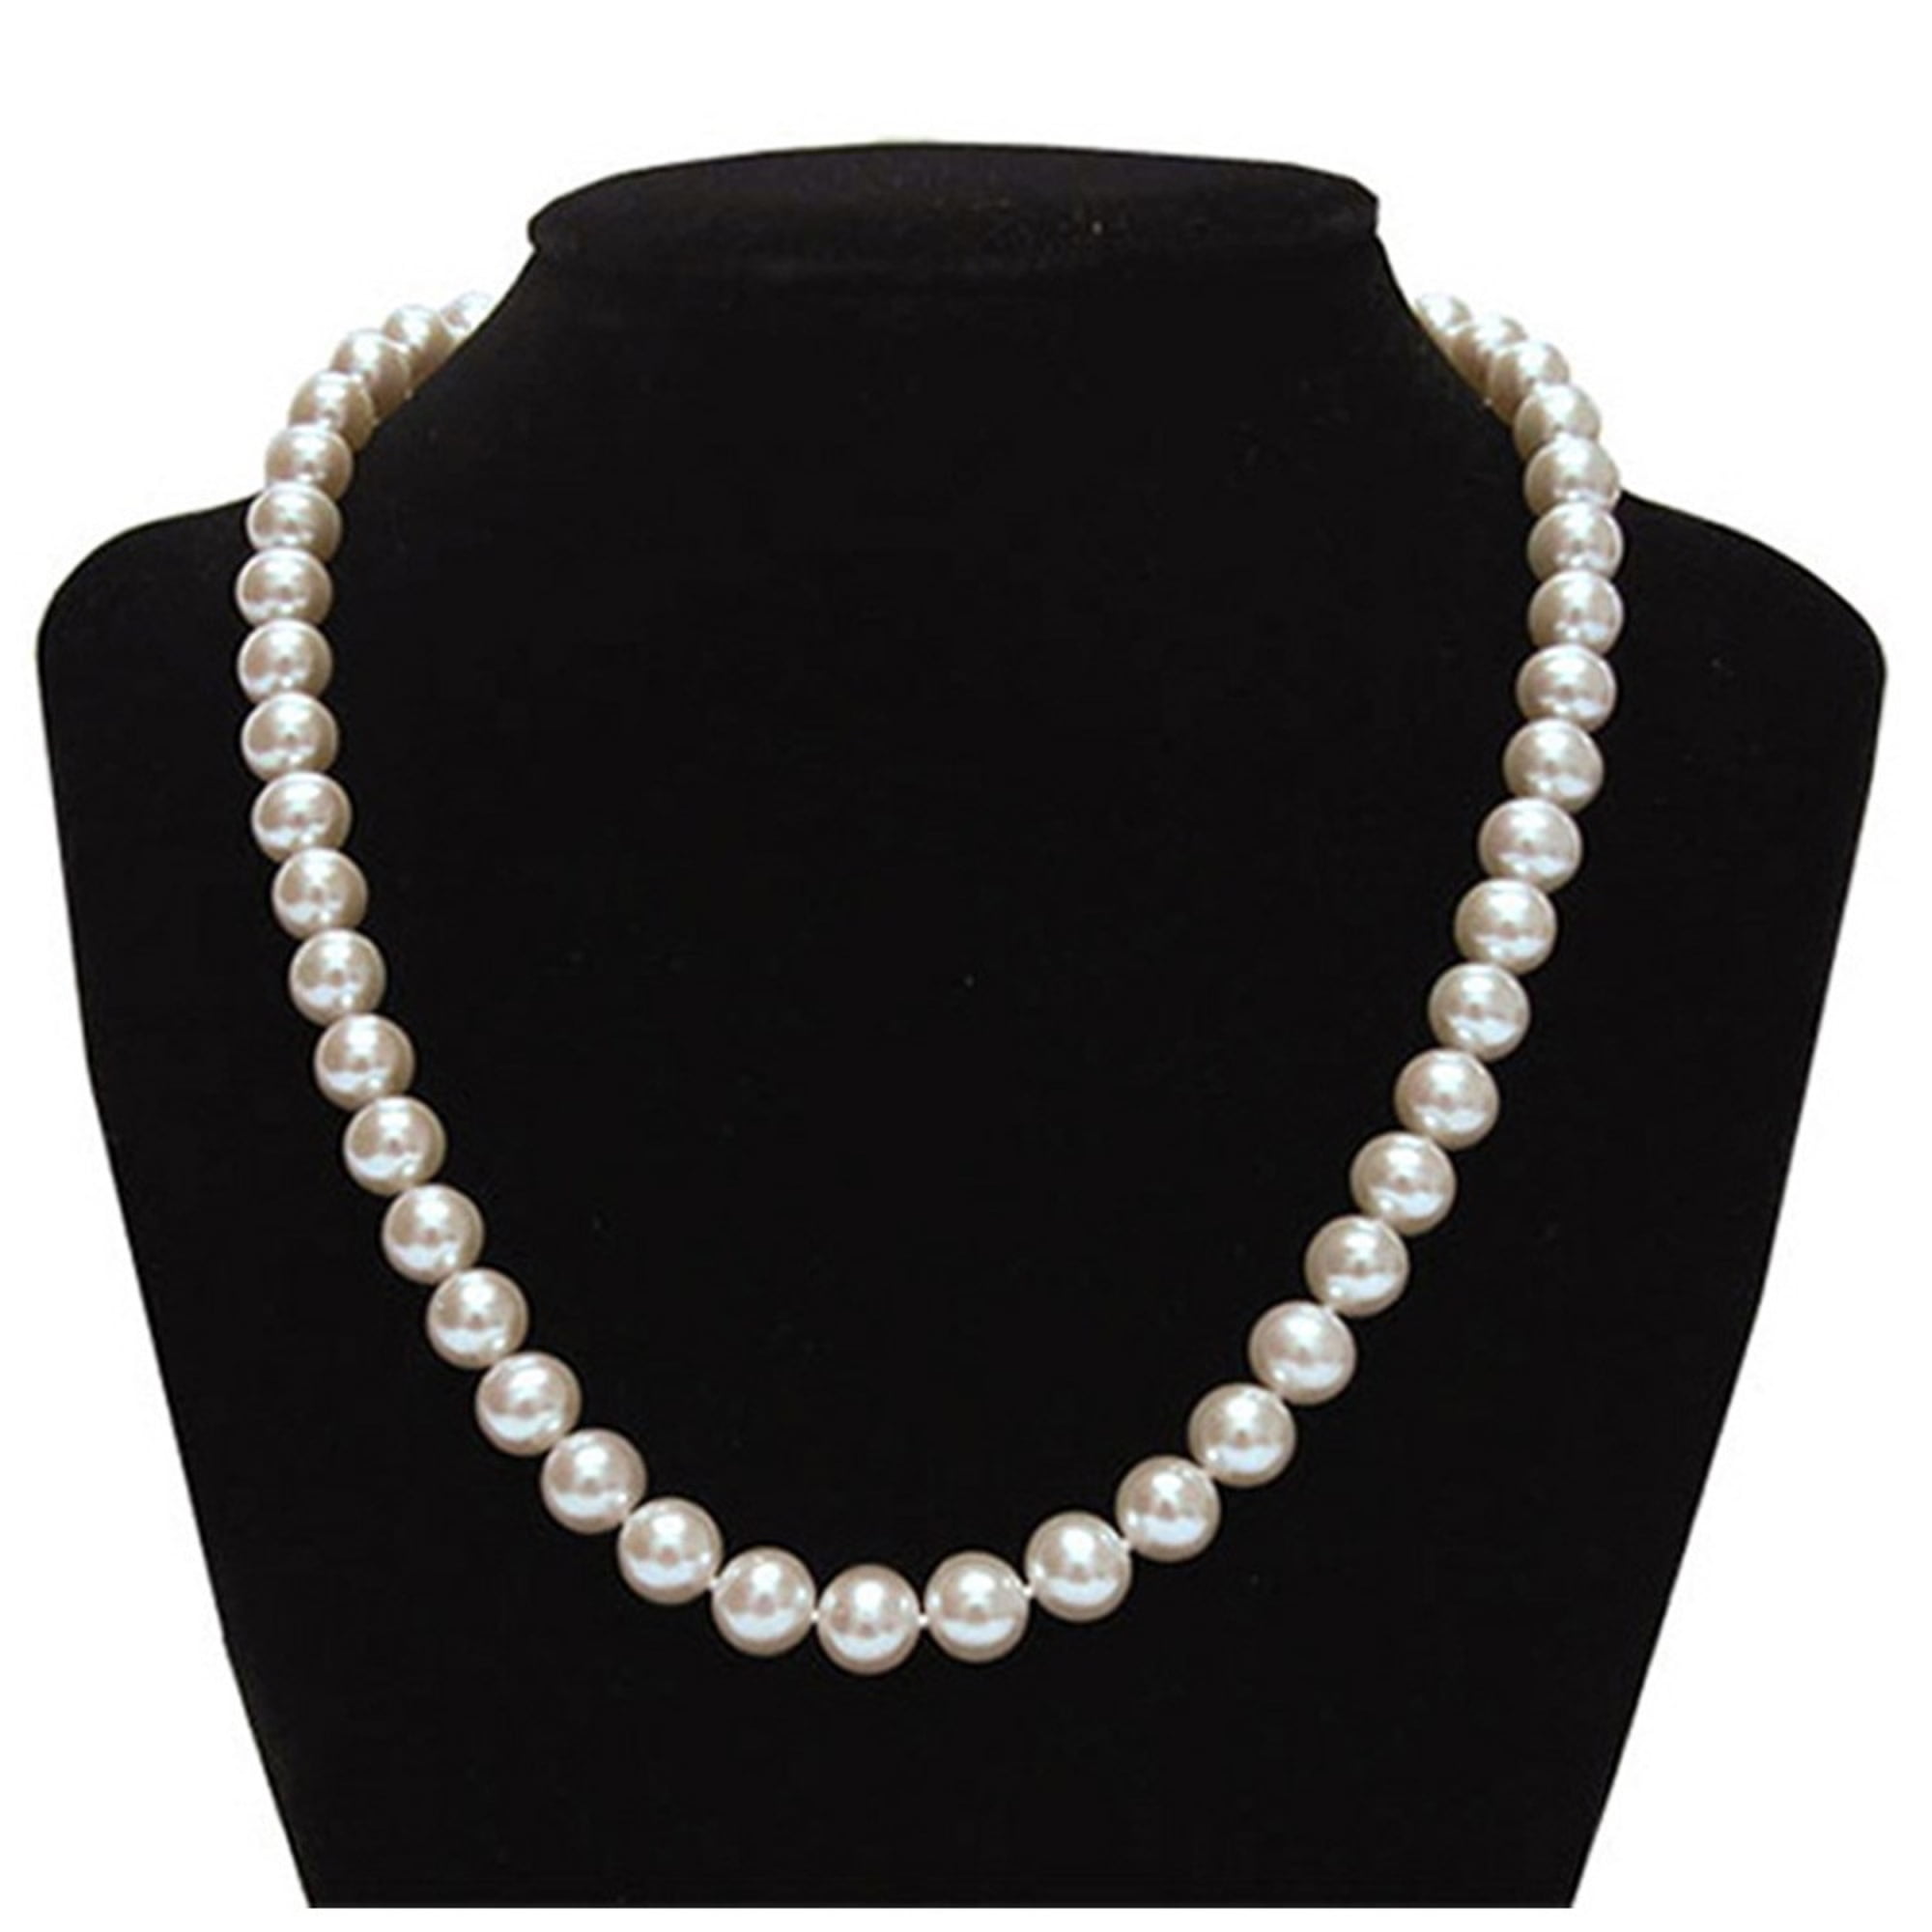 Necklace 17 Inches Long PriceRock Sterling Silver 7-8mm Freshwater Cultured Pearl w/2in ext